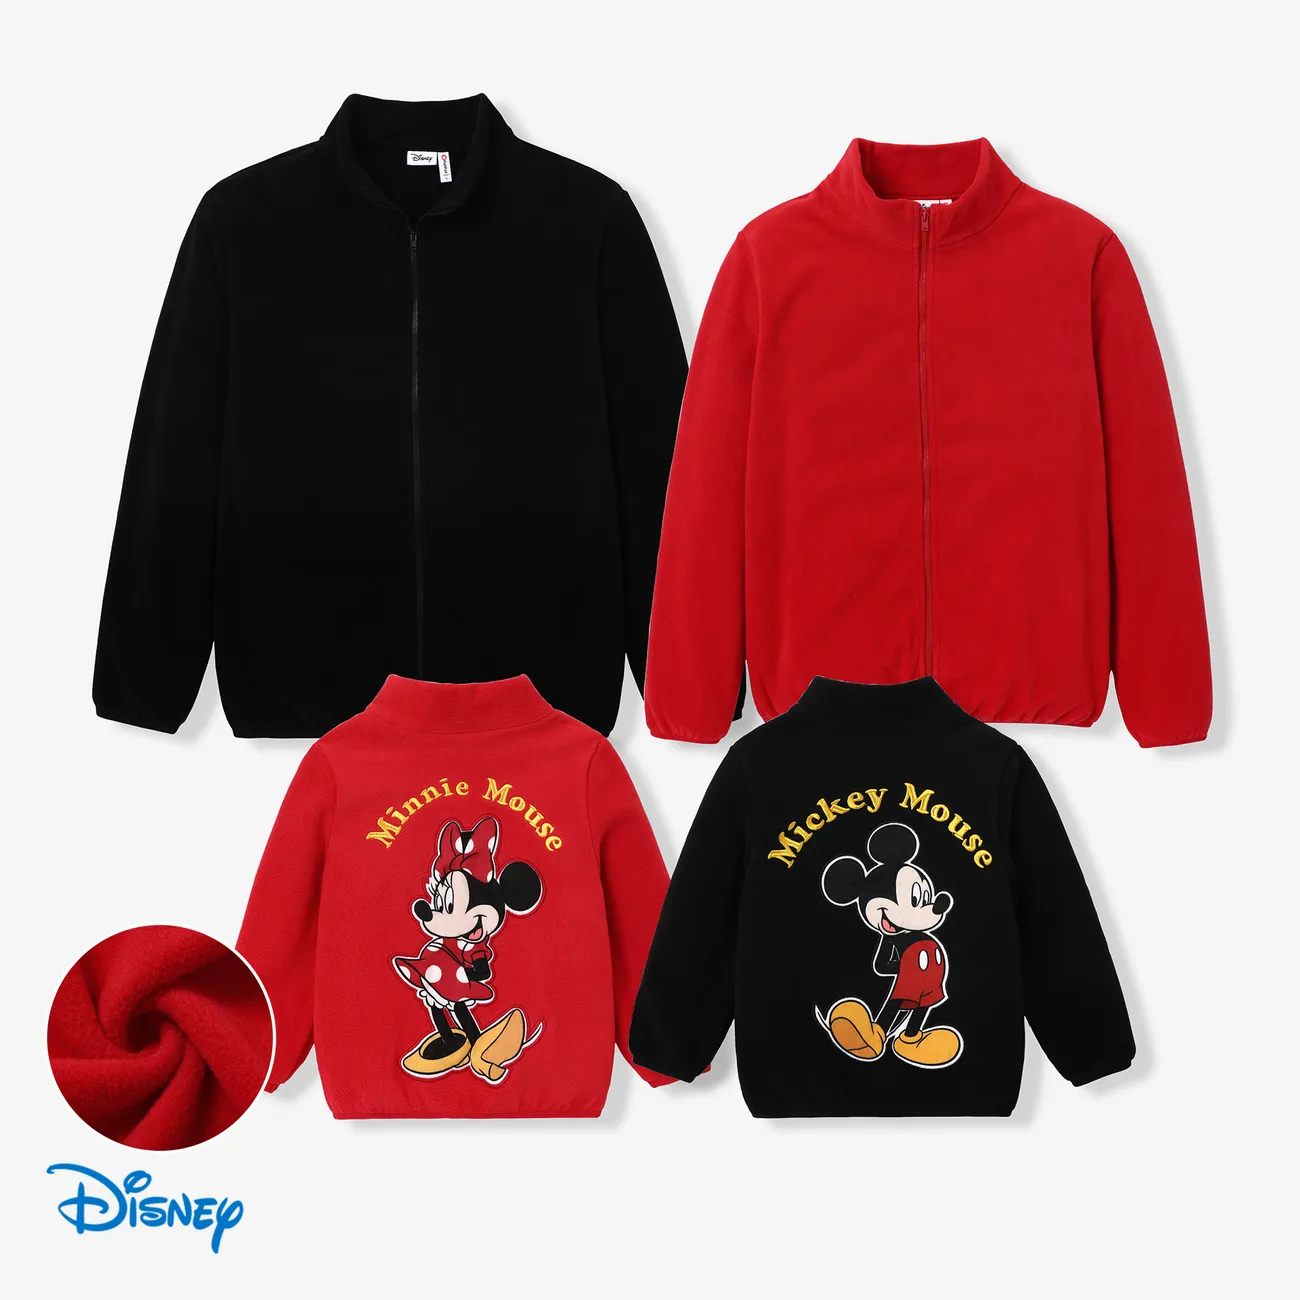 Disney Mickey and Friends Family Matching Back Panel Embroidered Polar Fleece Jacket redblack big image 1